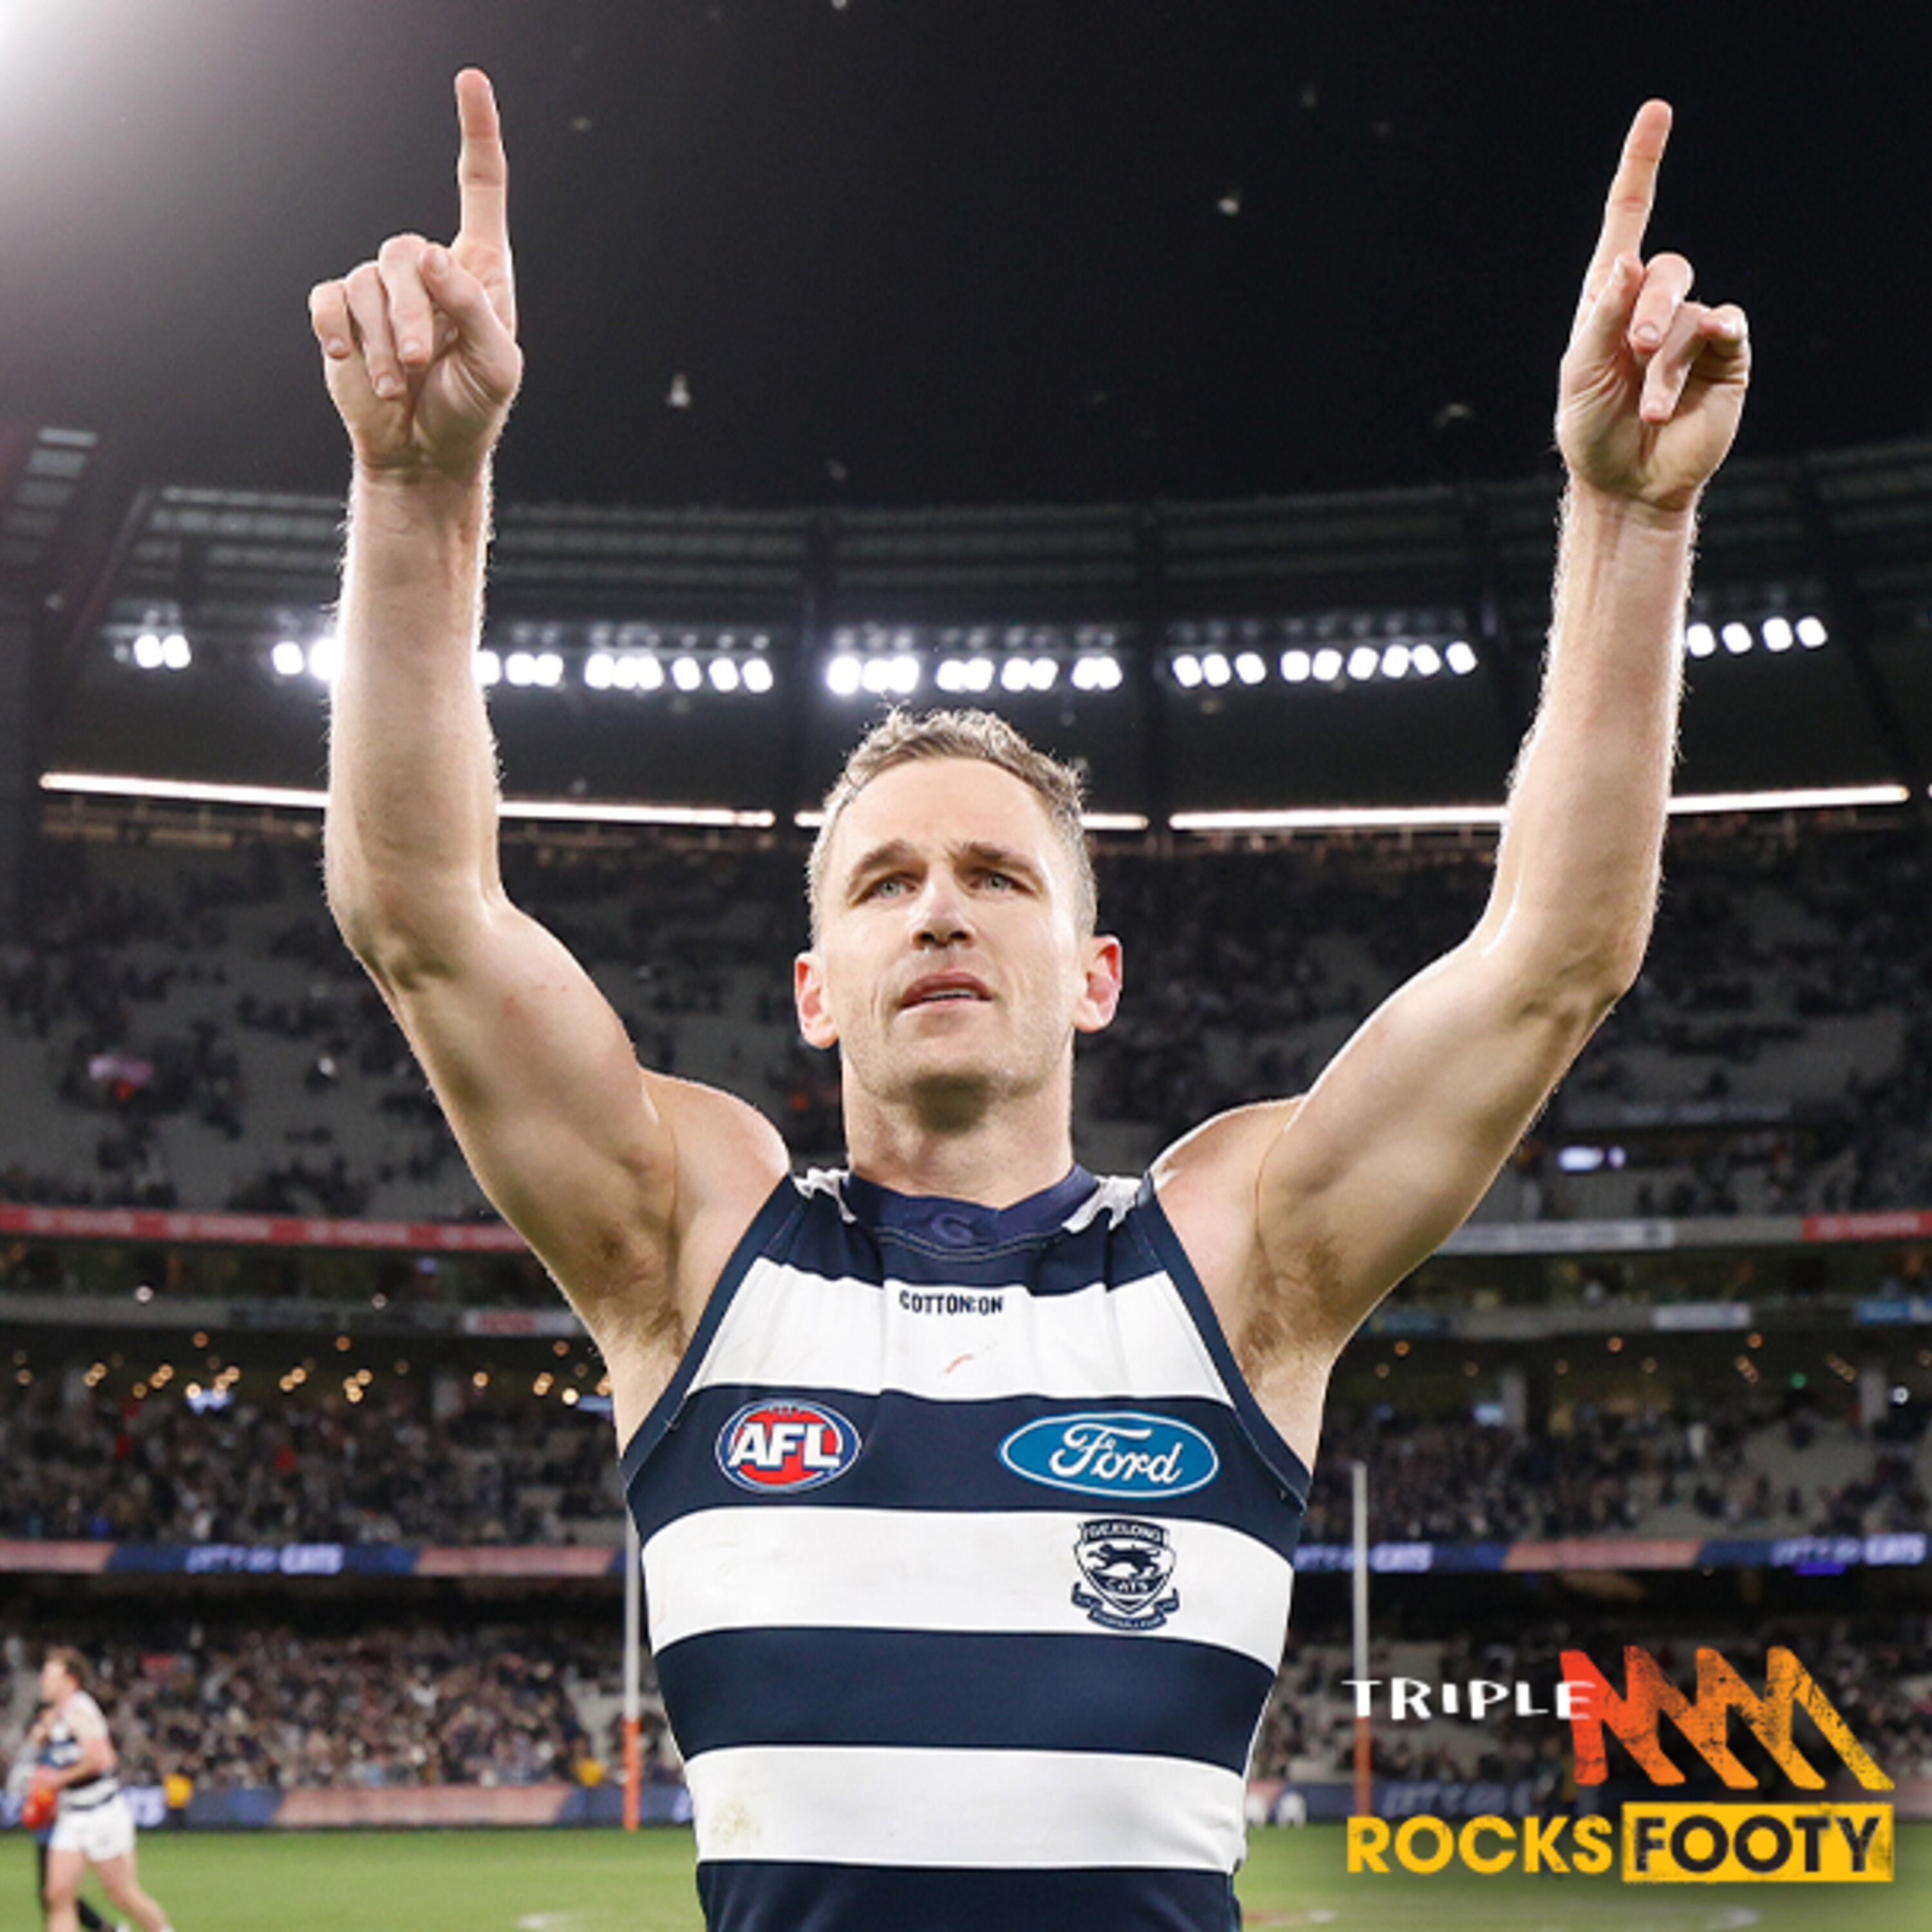 Triple M call the final stages of Geelong's epic win over Collingwood